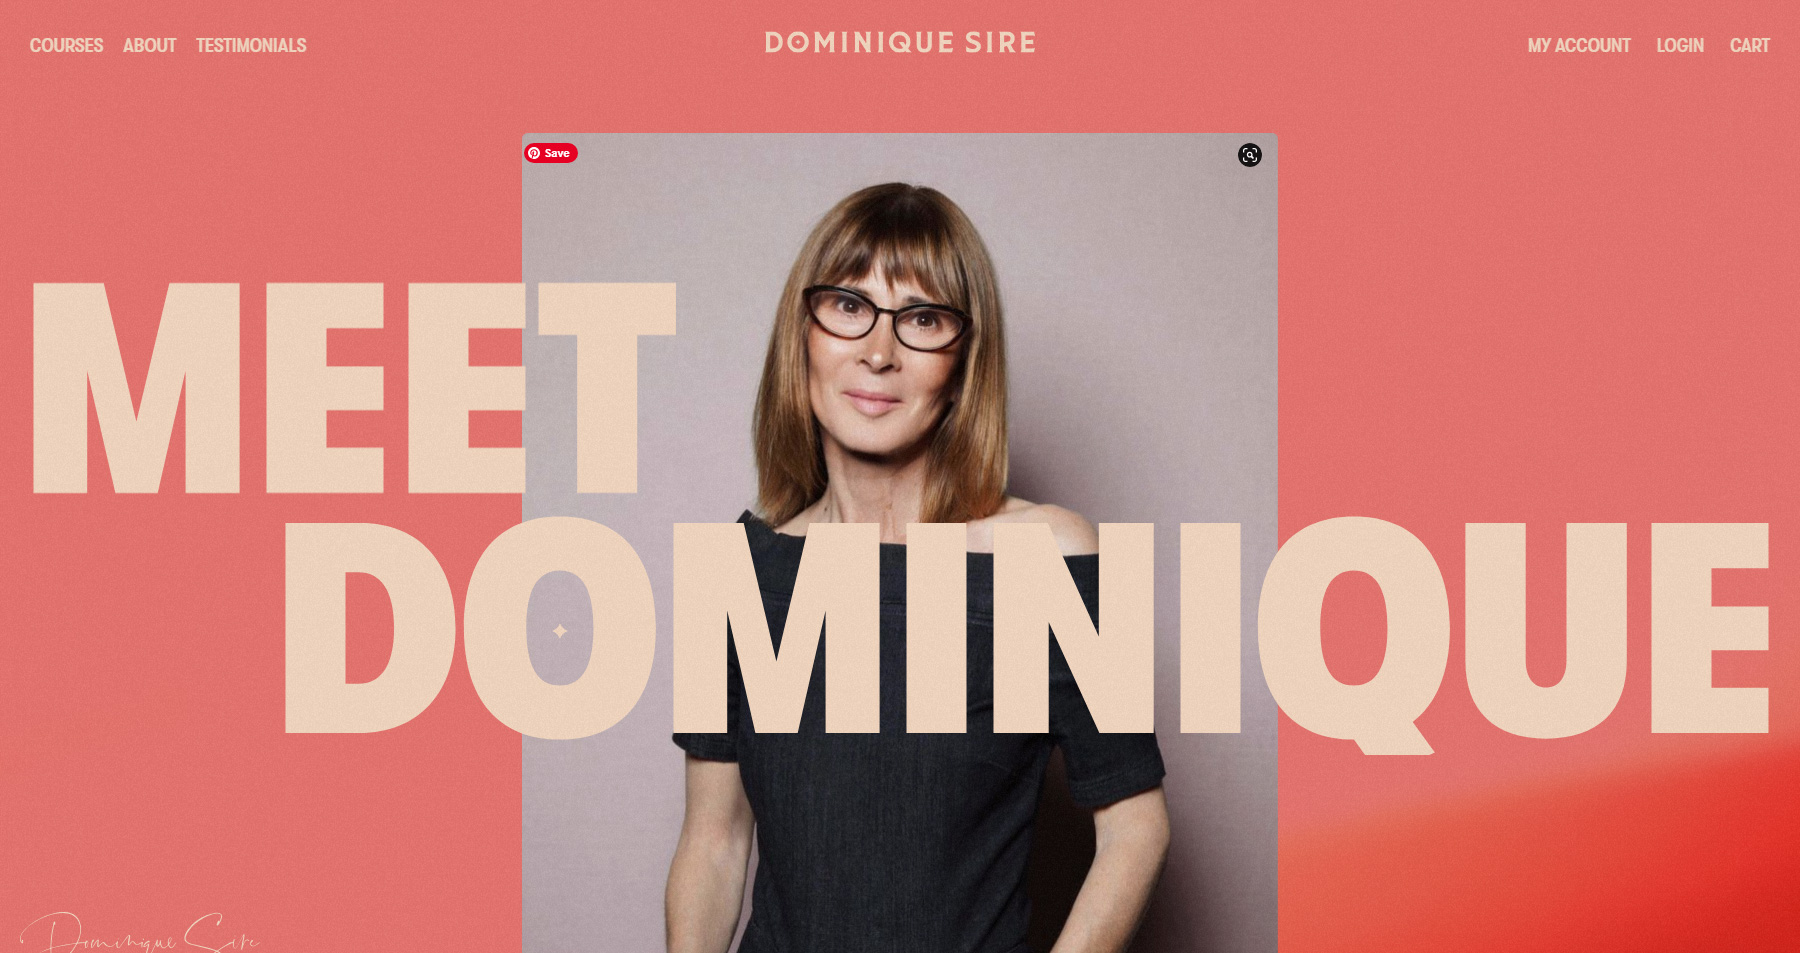 Dominique Sire - Website of the Day